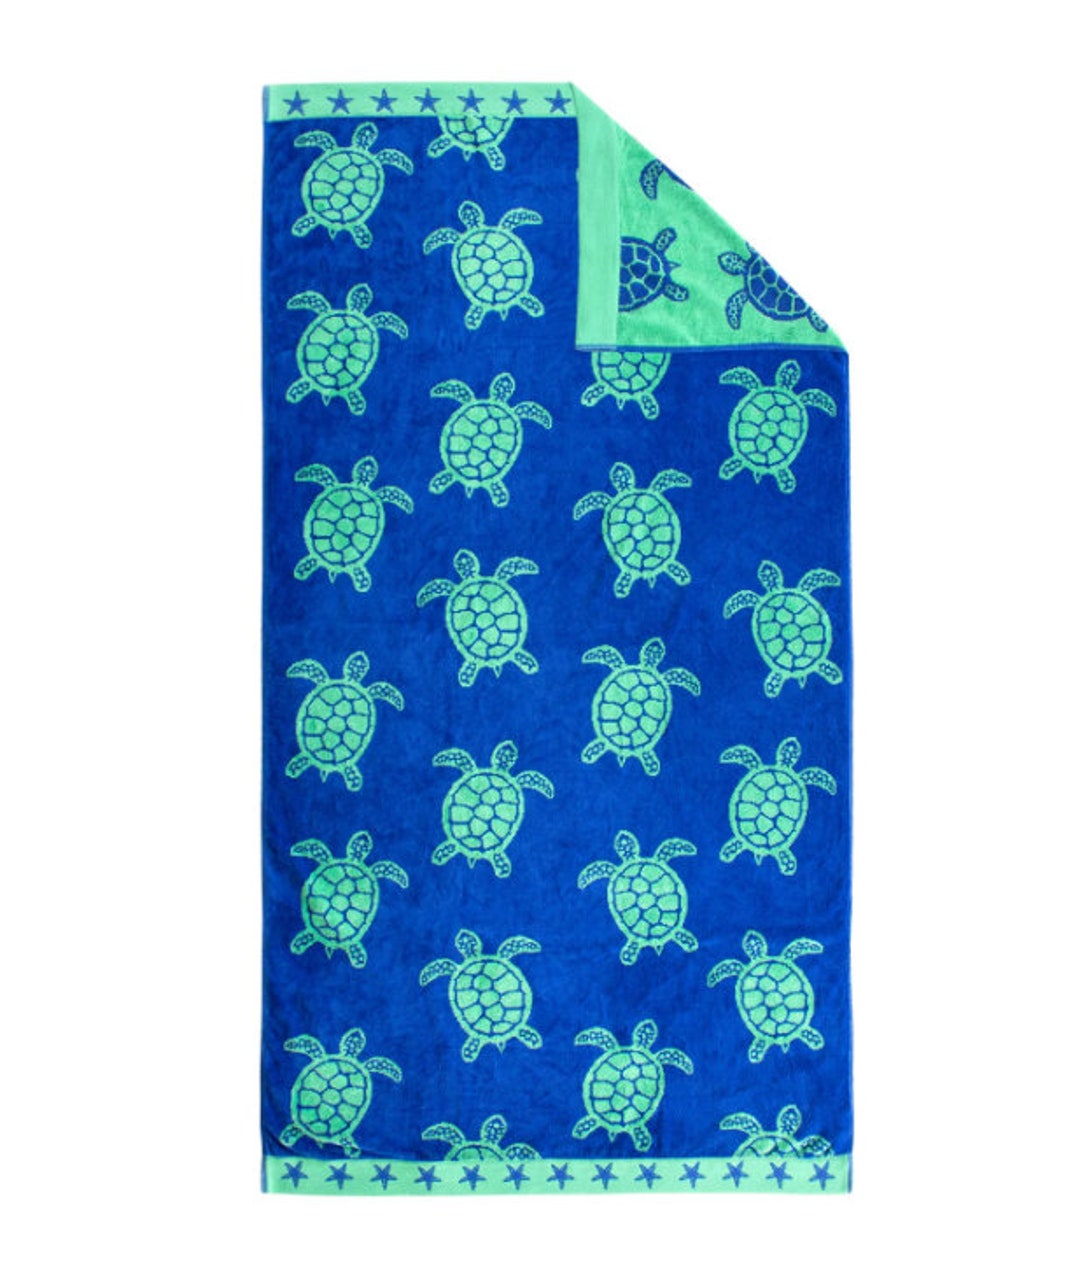 Personalize Kids Turtle Beach Towel Kids Embroider Turtle 